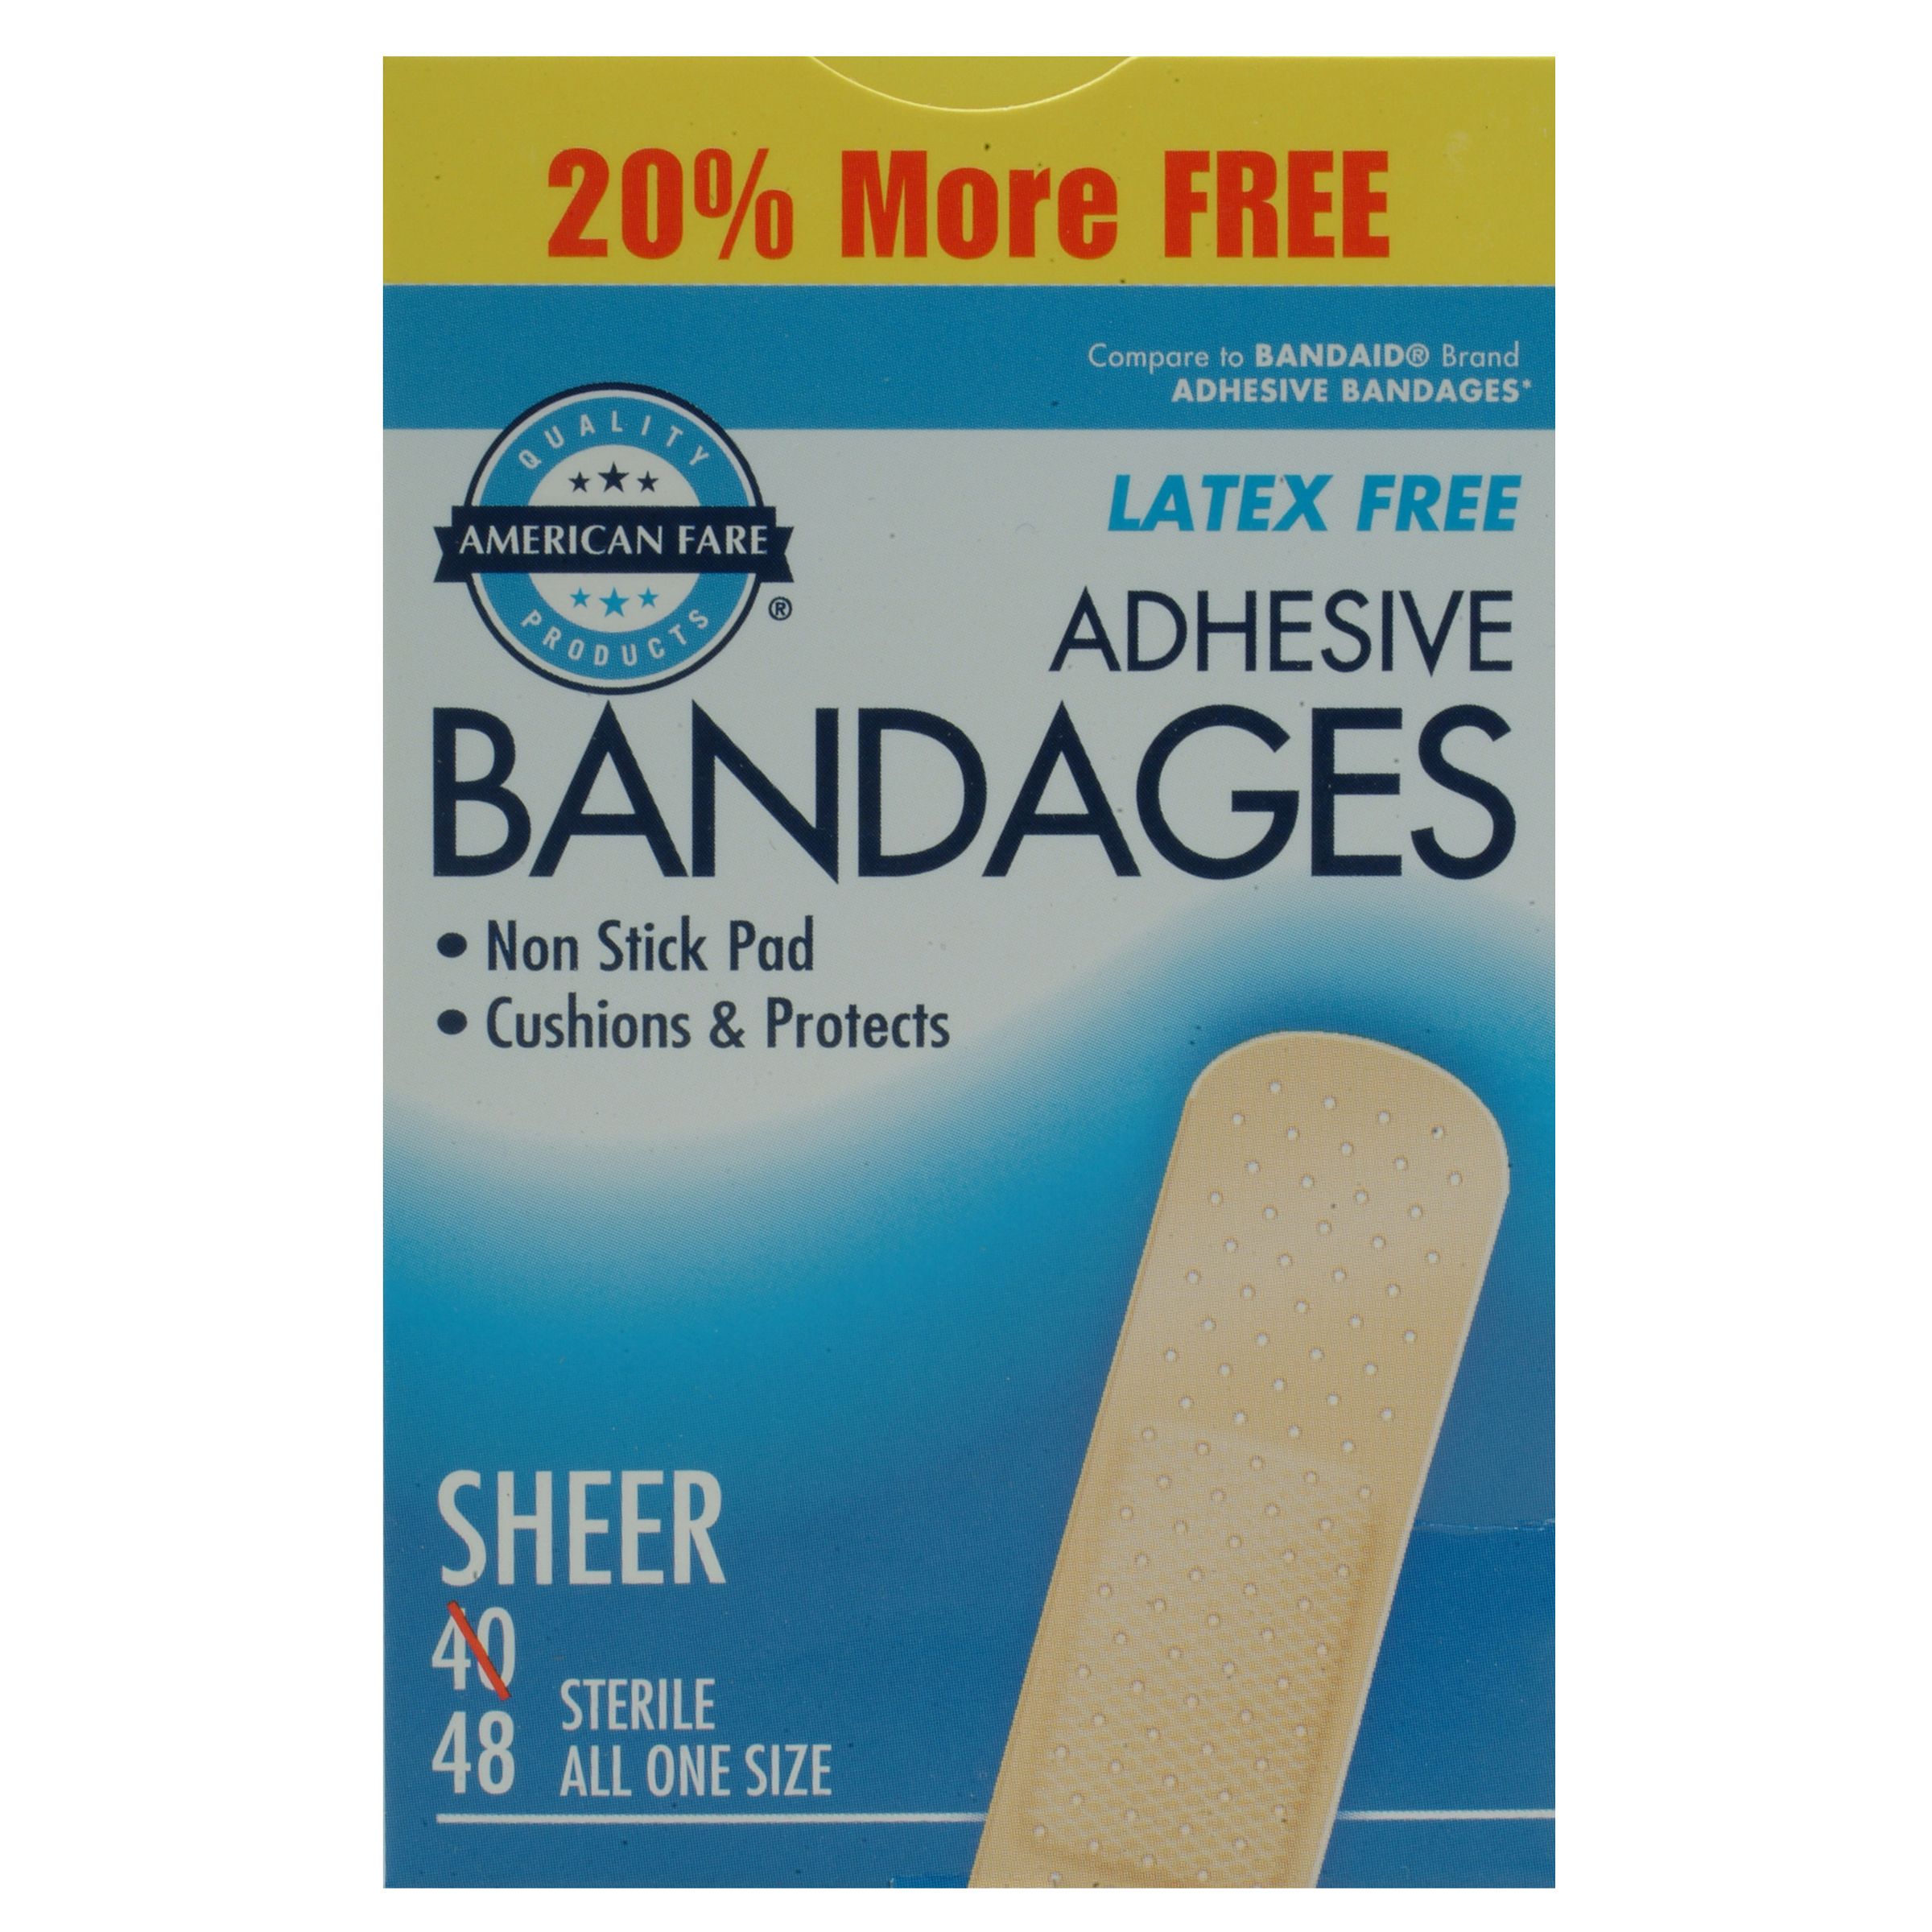 American Fare Sheer Bandages 3/4 inch - 40 count